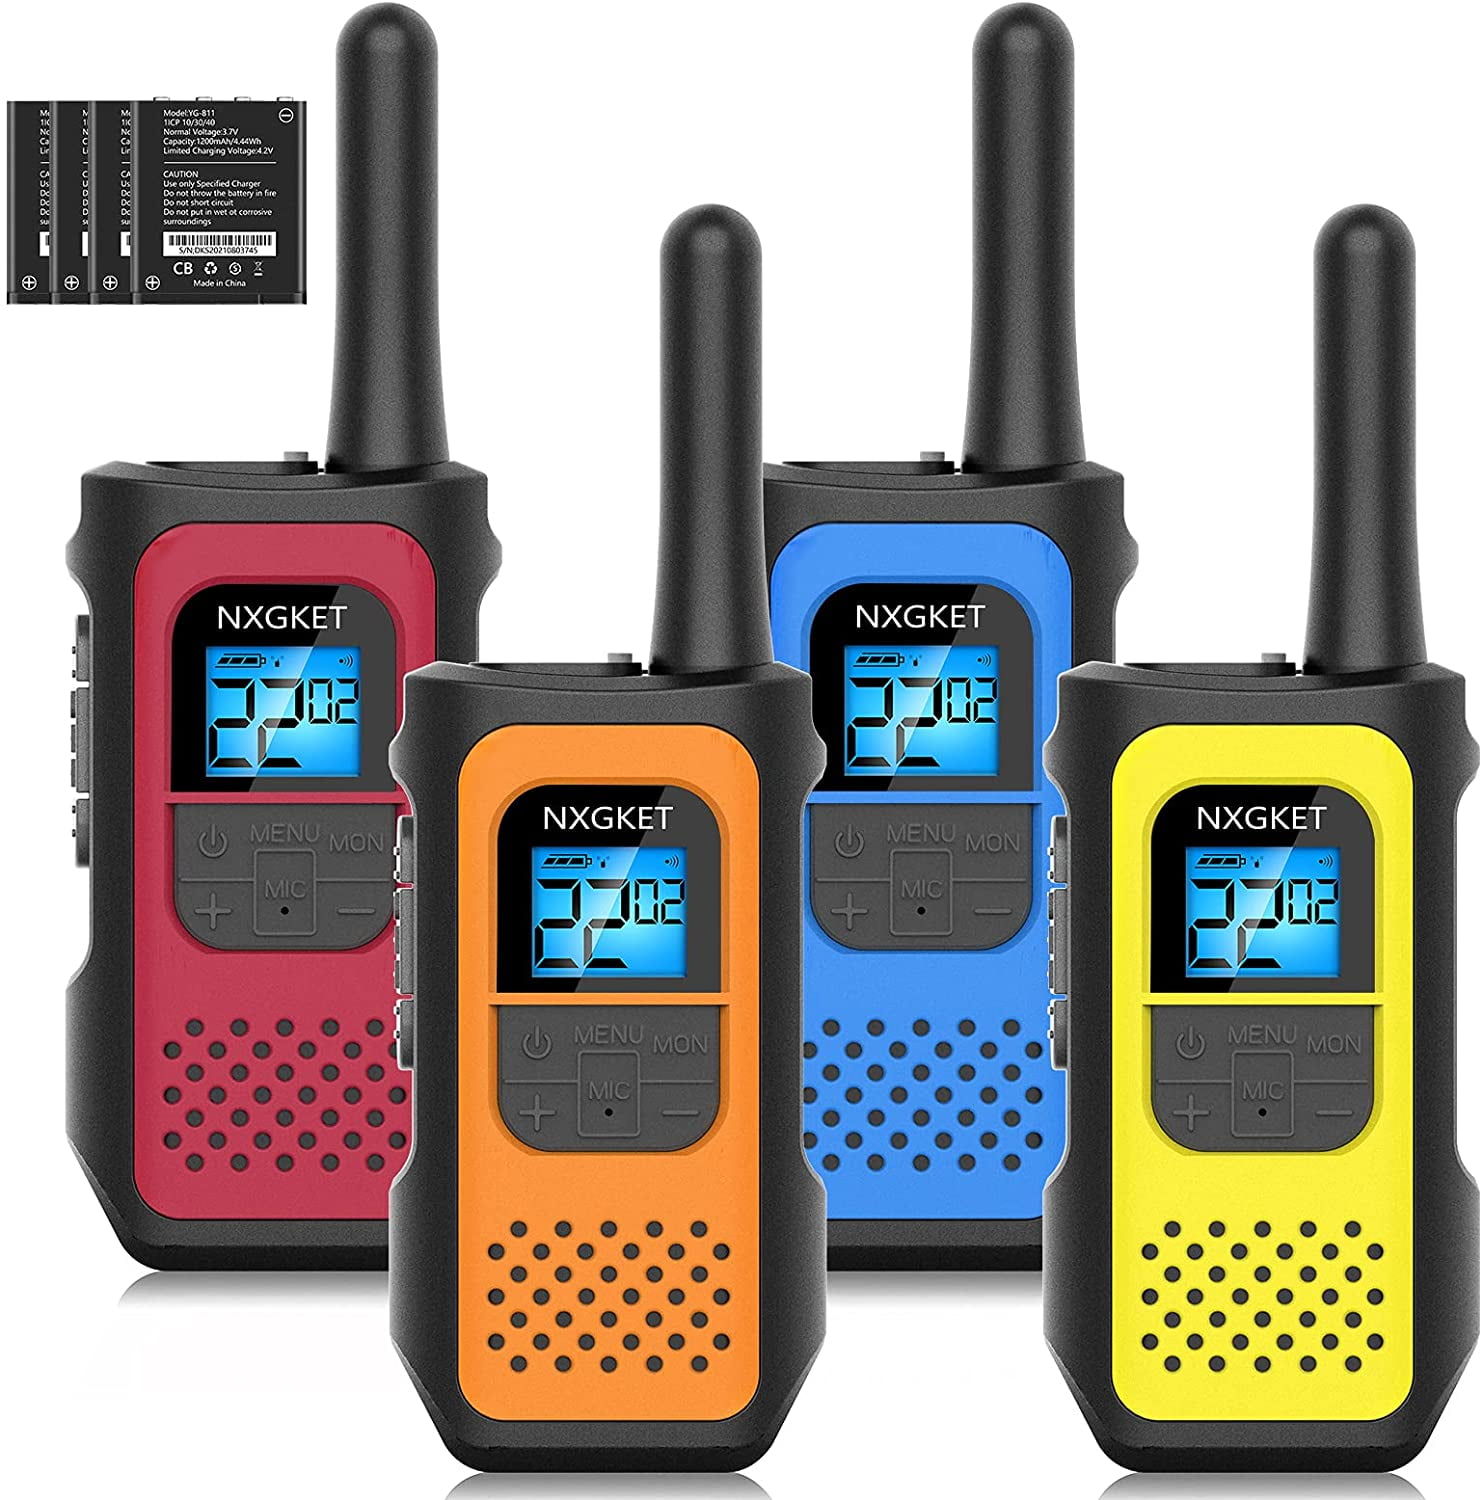 6 Pack Walkie Talkie Long Rang Walkie Talkies Built-in LED Flashlight Included Li-ion Battery and Charger Pack of 6